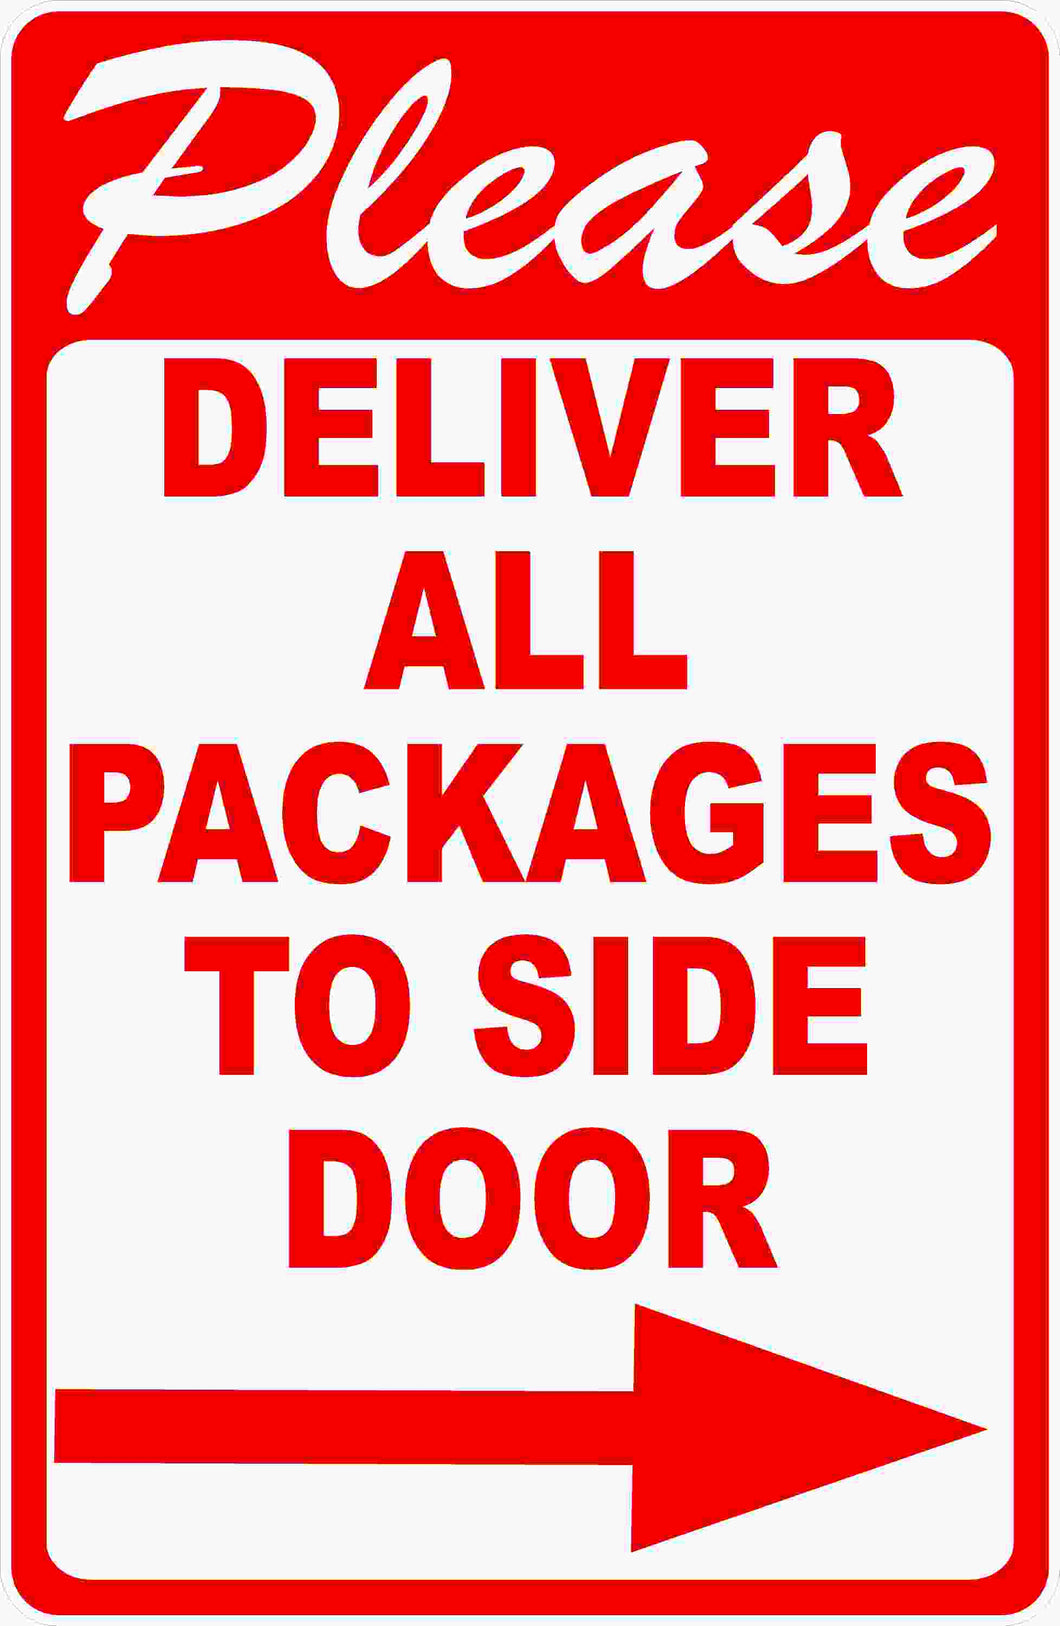 Please Deliver All Packages To Side Door Sign with Arrow